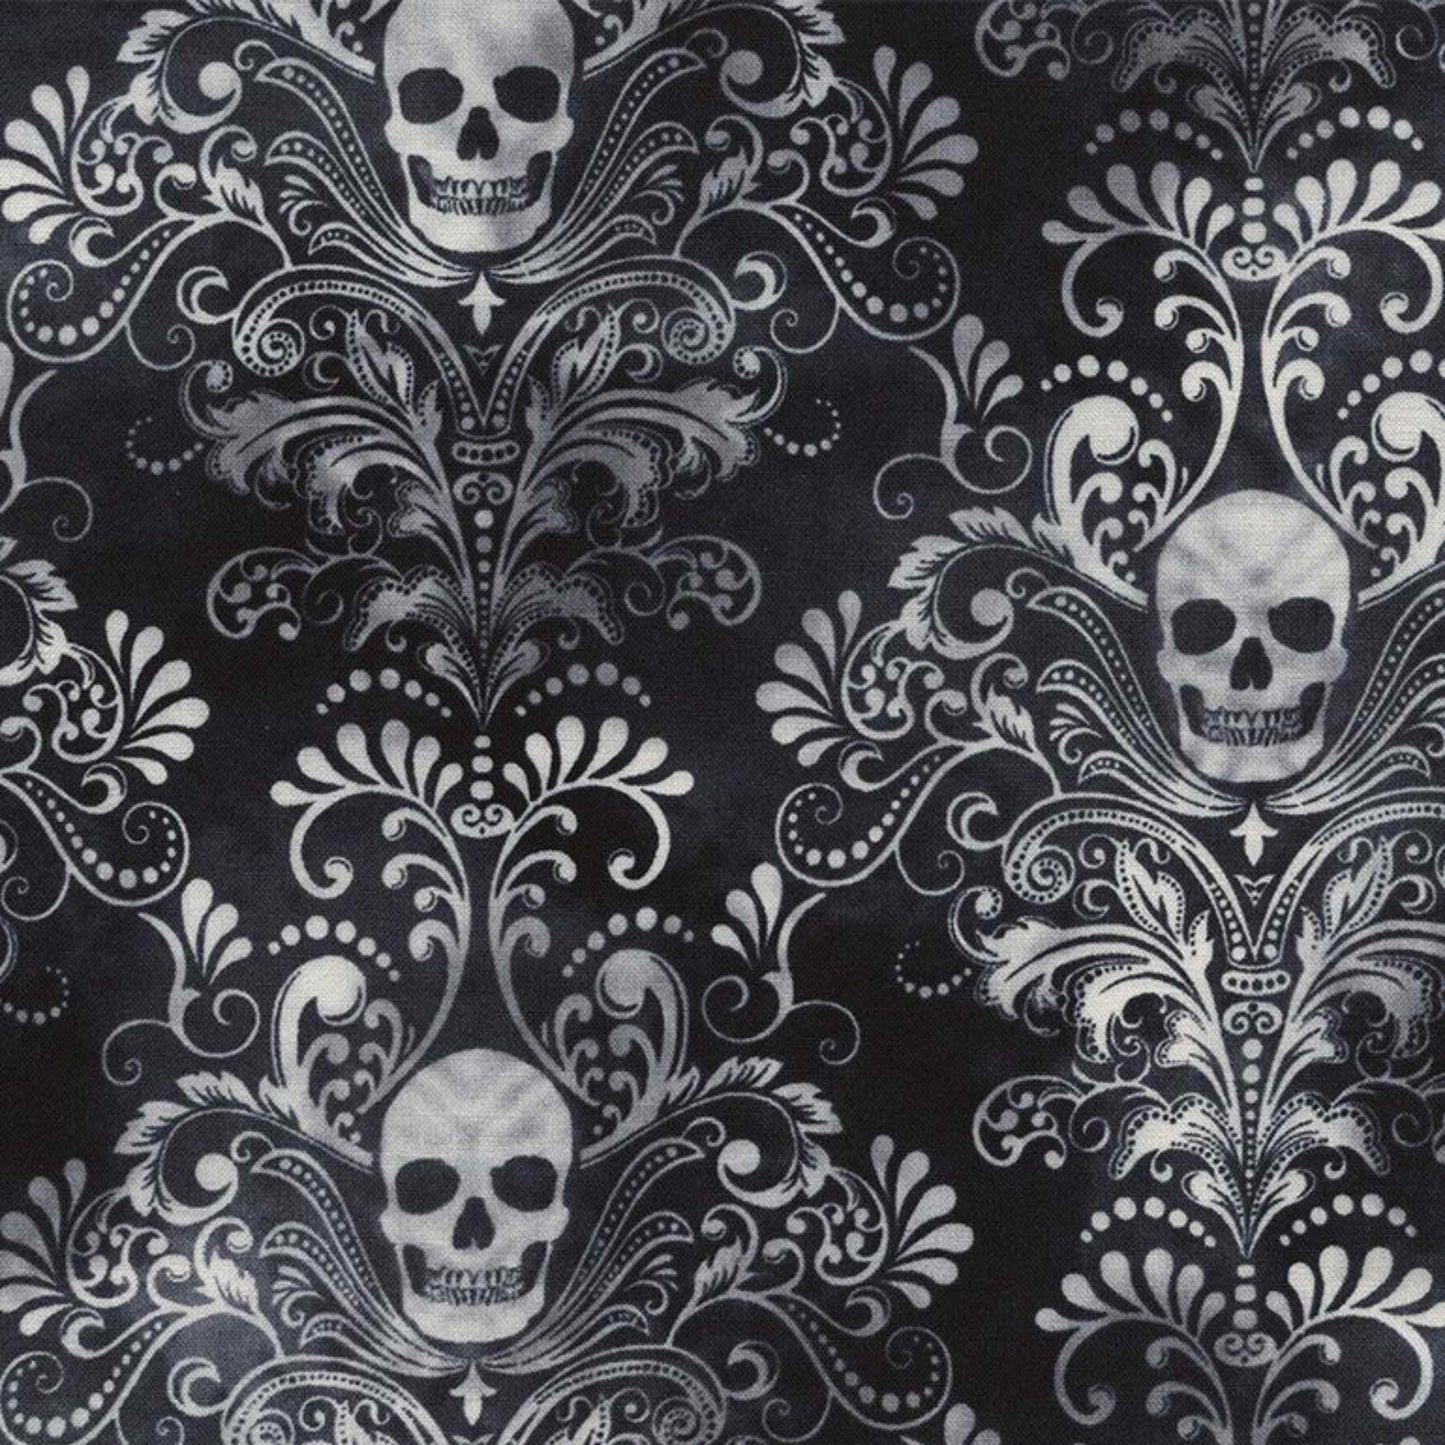 Fabric By The Yard - Skull Damask Negative - WICKED-C3759 - Charcoal - Timeless Treasures